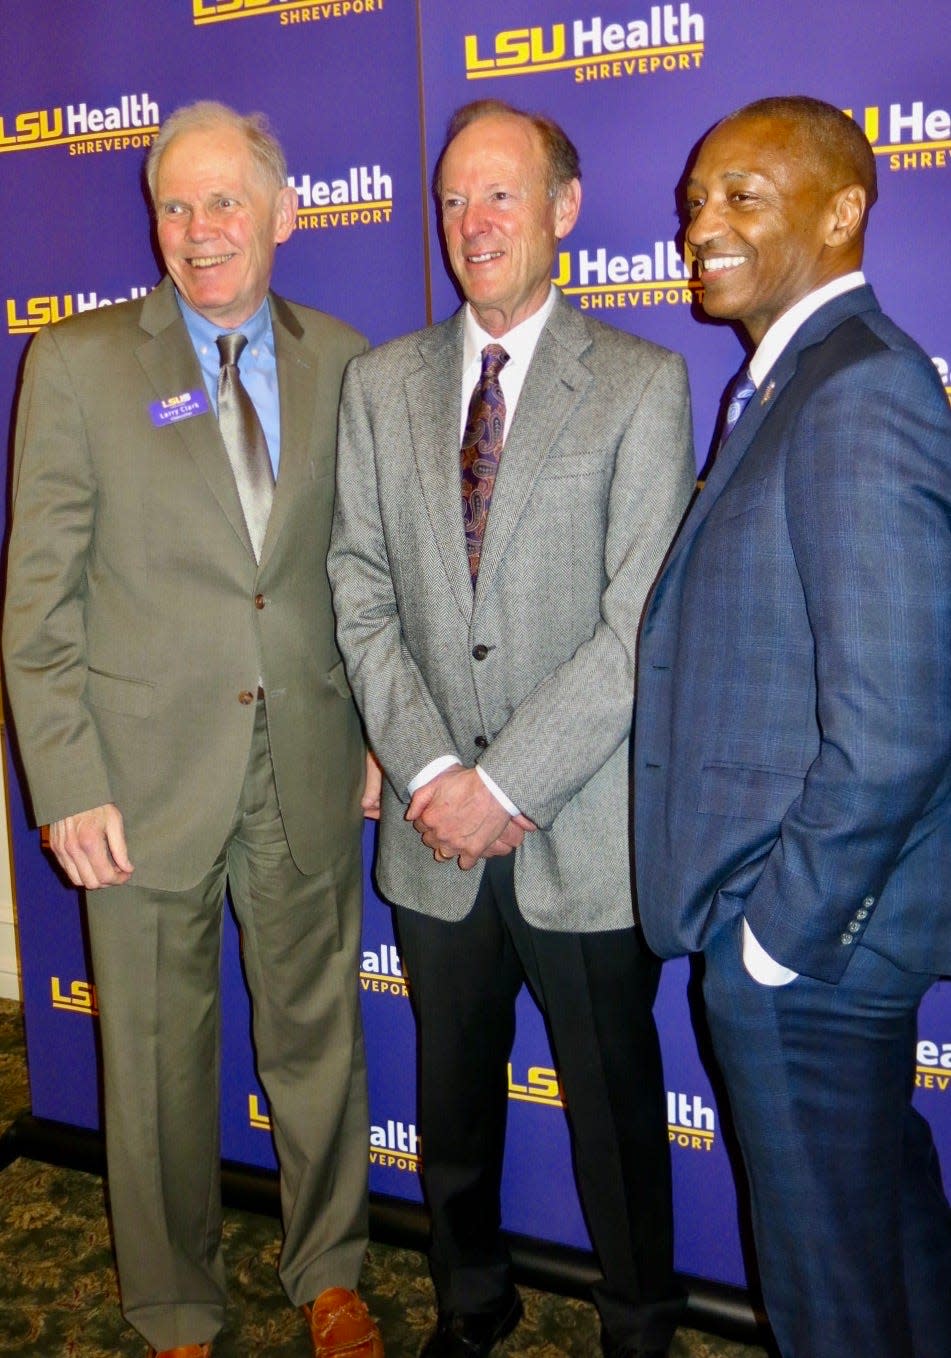 LSUS Chancellor Dr. Larry Clark, new LSU Health
Chancellor Dr. David S. Guzick, and LSU President Dr. William F. Tate IV.